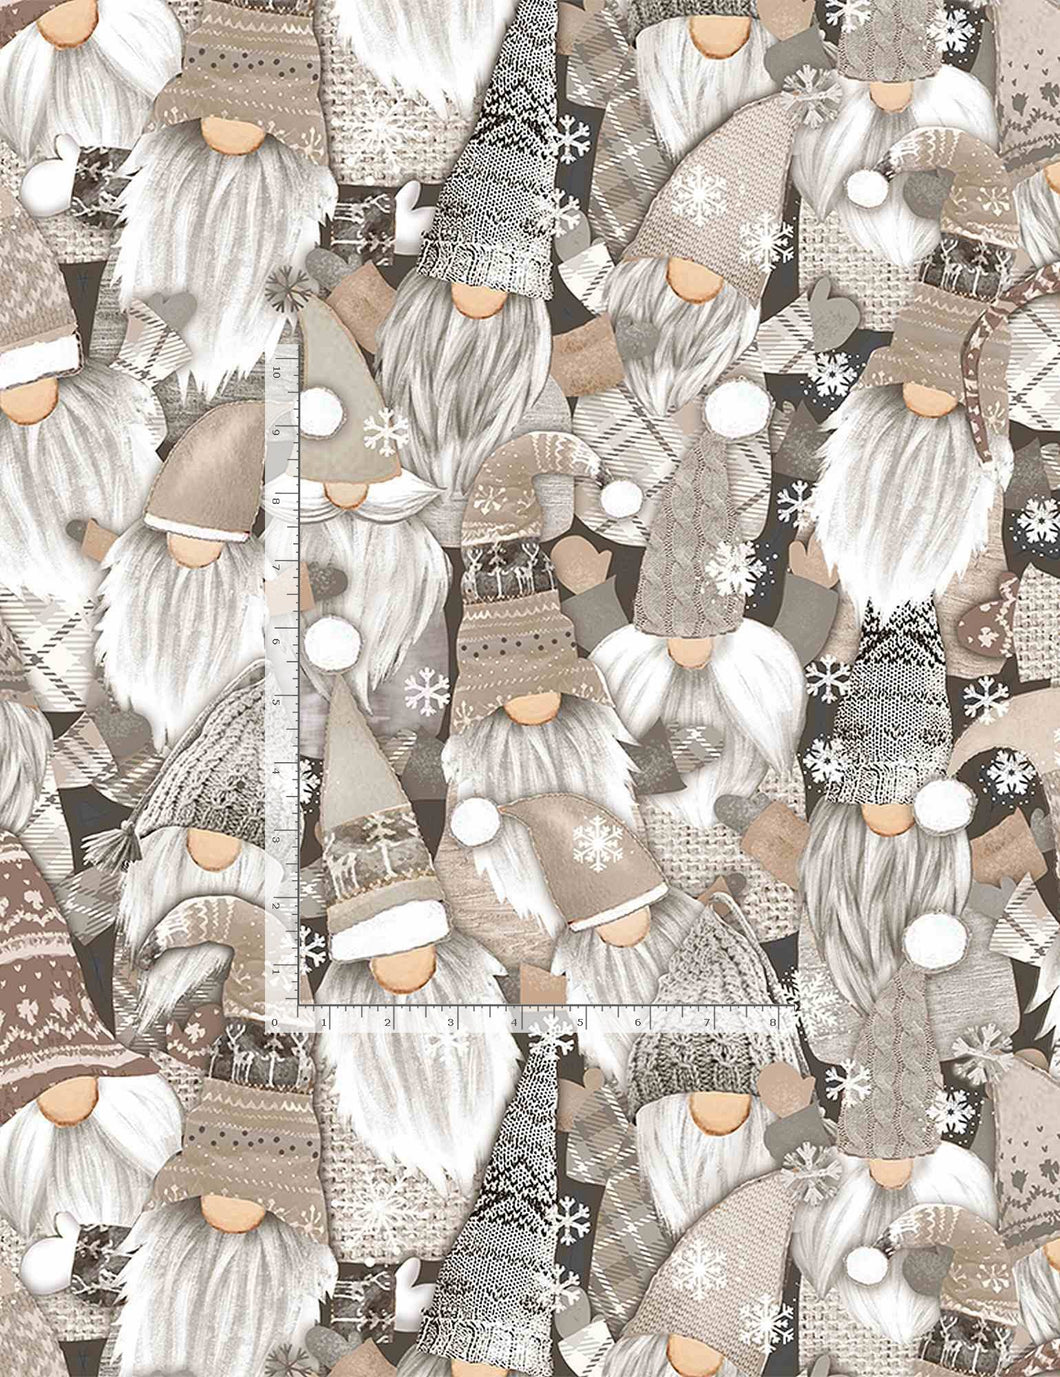 PACKED WHITE HOLIDAY GNOMES by Gail Cadden for Timeless Treasures, GAIL-C8208 NATURAL